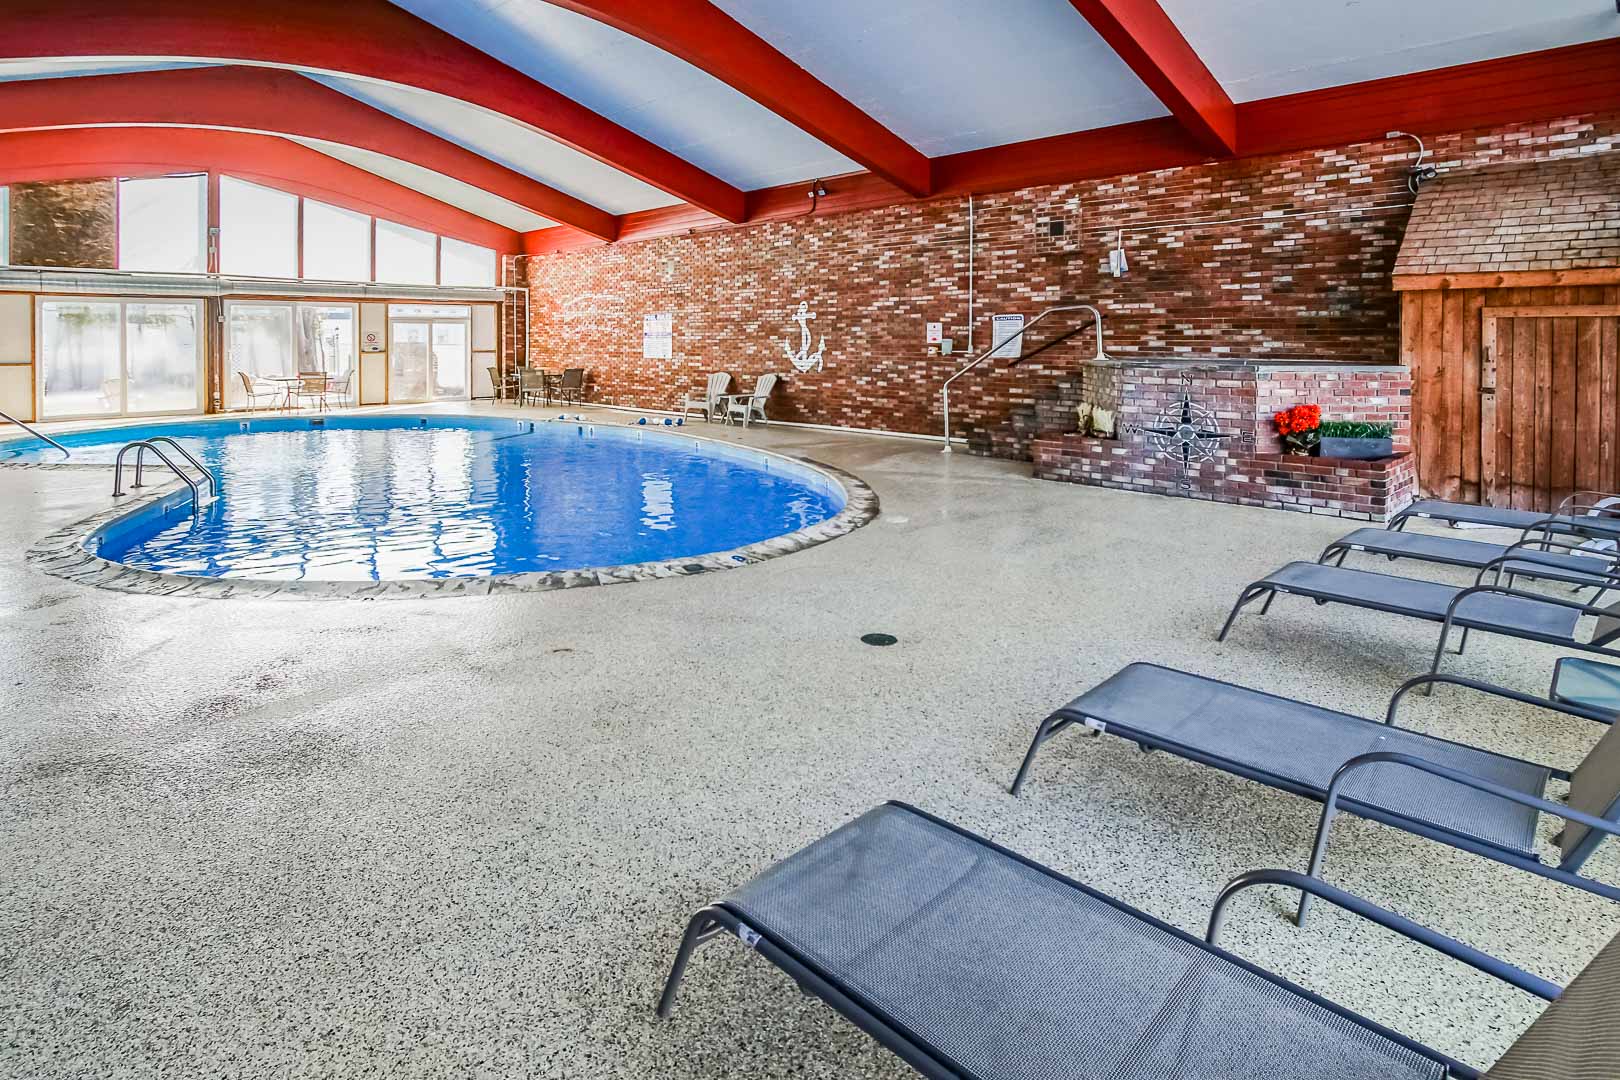 A peaceful indoor swimming pool at VRI's Courtyard Resort in Massachusetts.